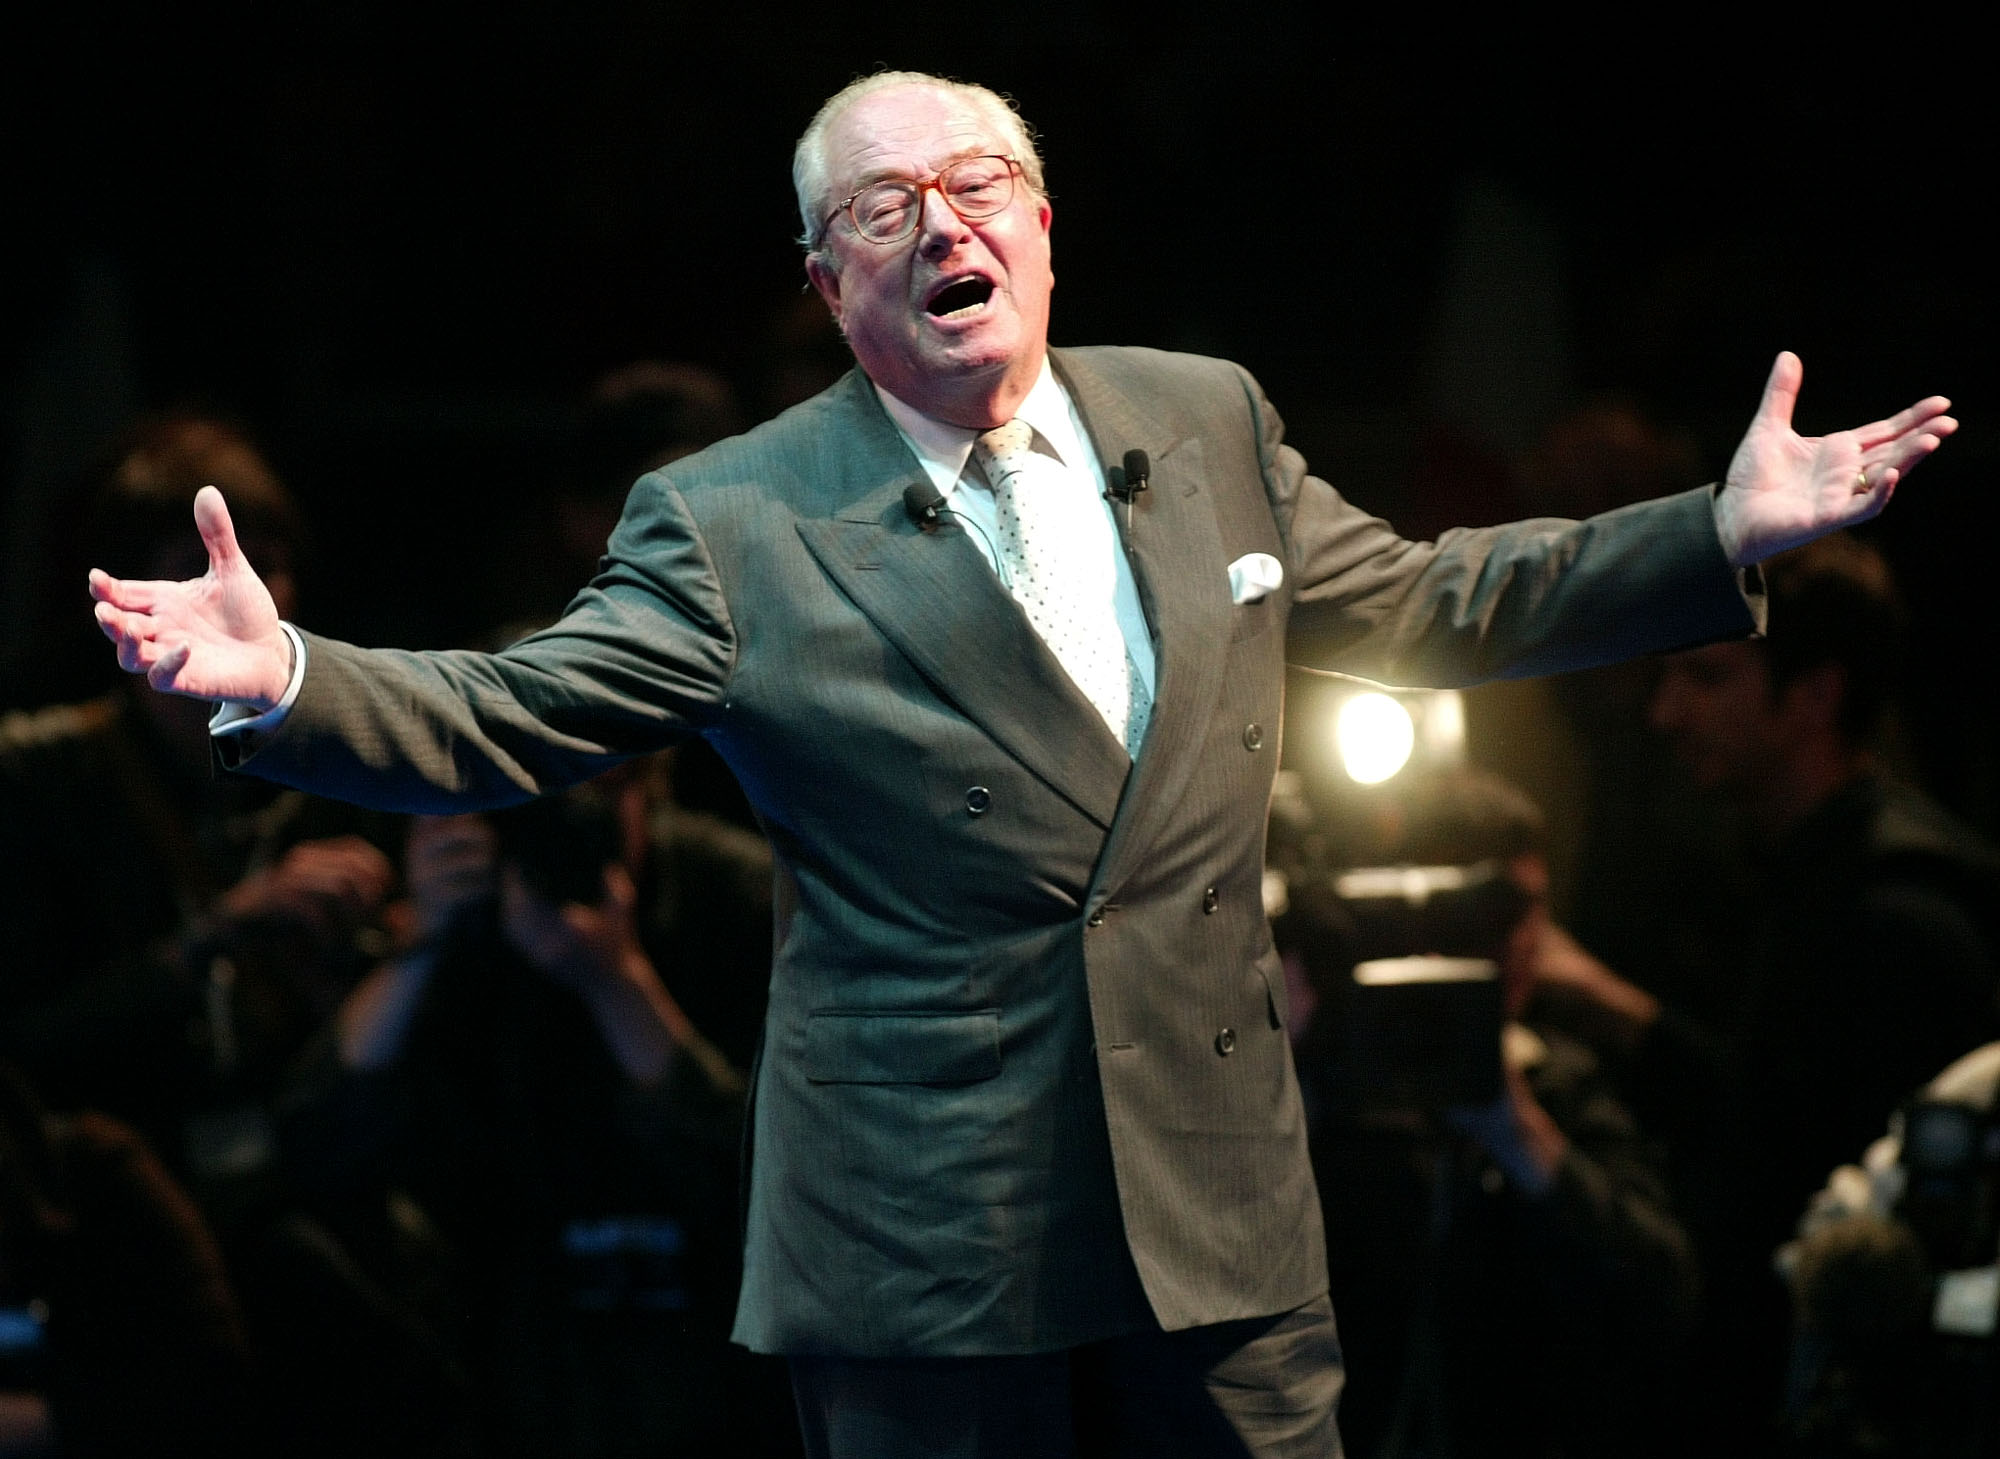 French far-right presidential candidate Jean-Marie Le Pen gestures during a meeting in Marseille, southern France, Saturday, May 2, 2002. Le Pen will face President and conservative candidate Jacques Chirac in the May 5 presidential election runoff. (AP PHOTO/Lionel Cironneau)